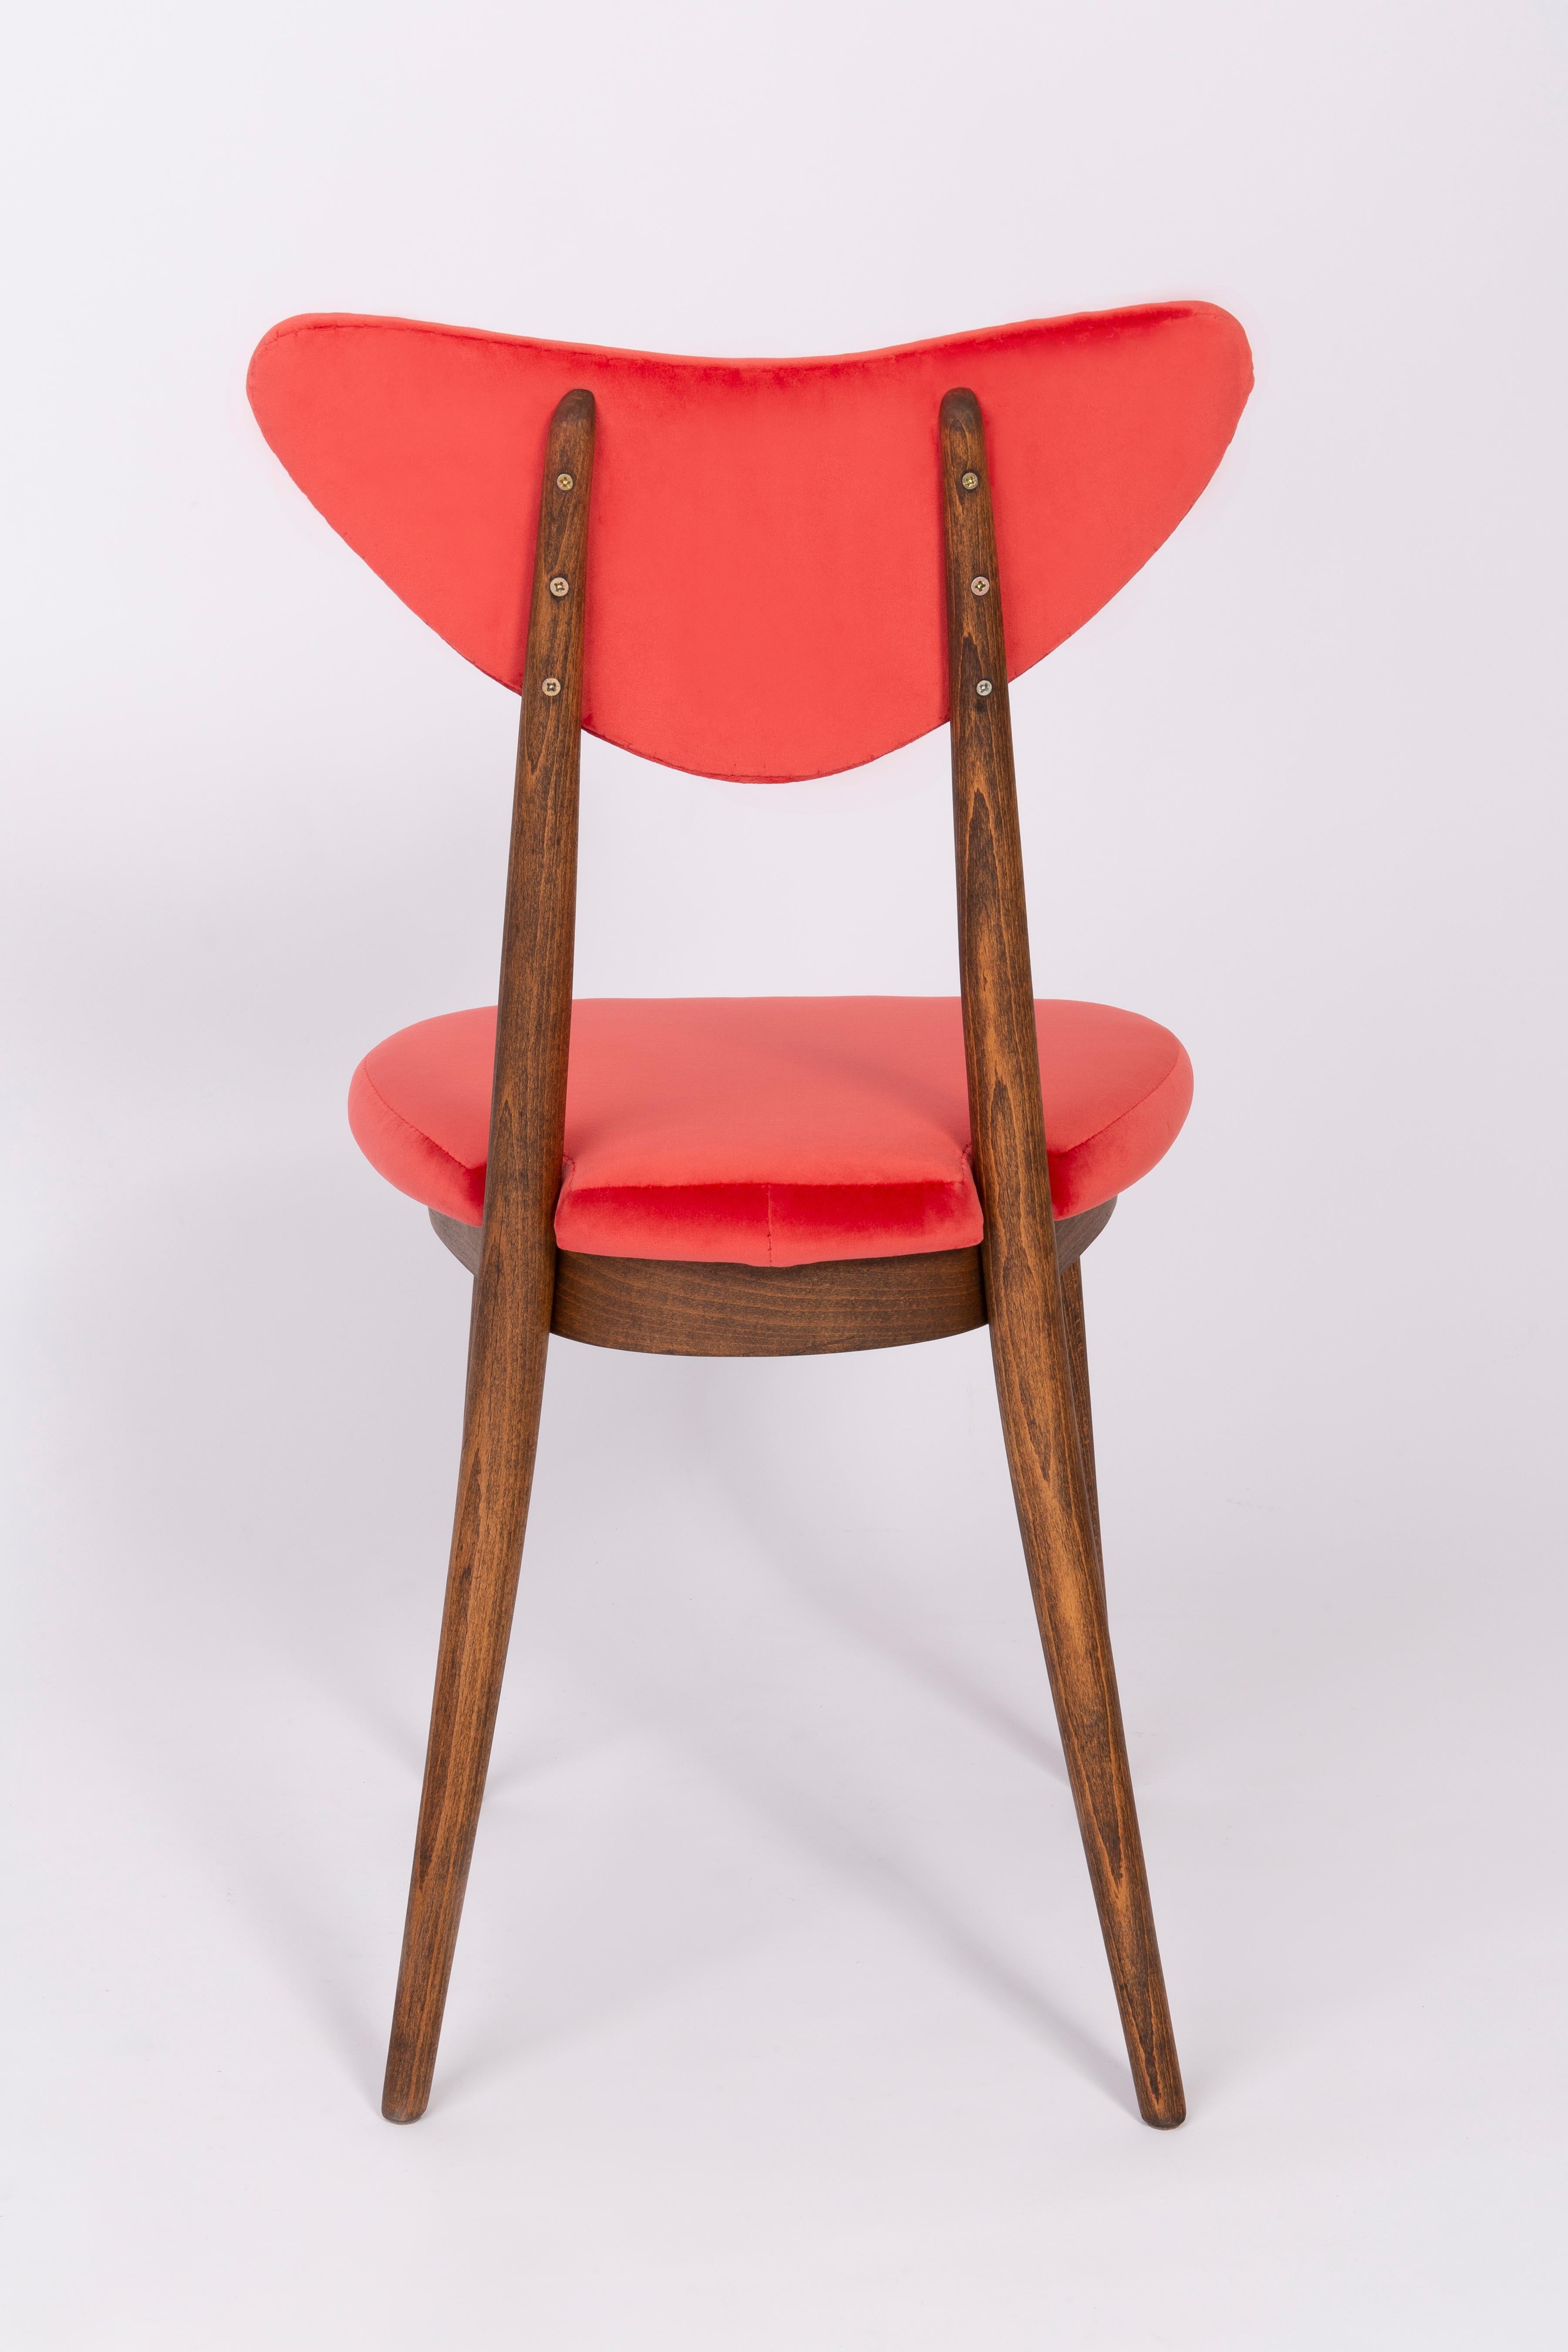 Velvet Pair of Red Heart Chairs, Poland, 1960s For Sale